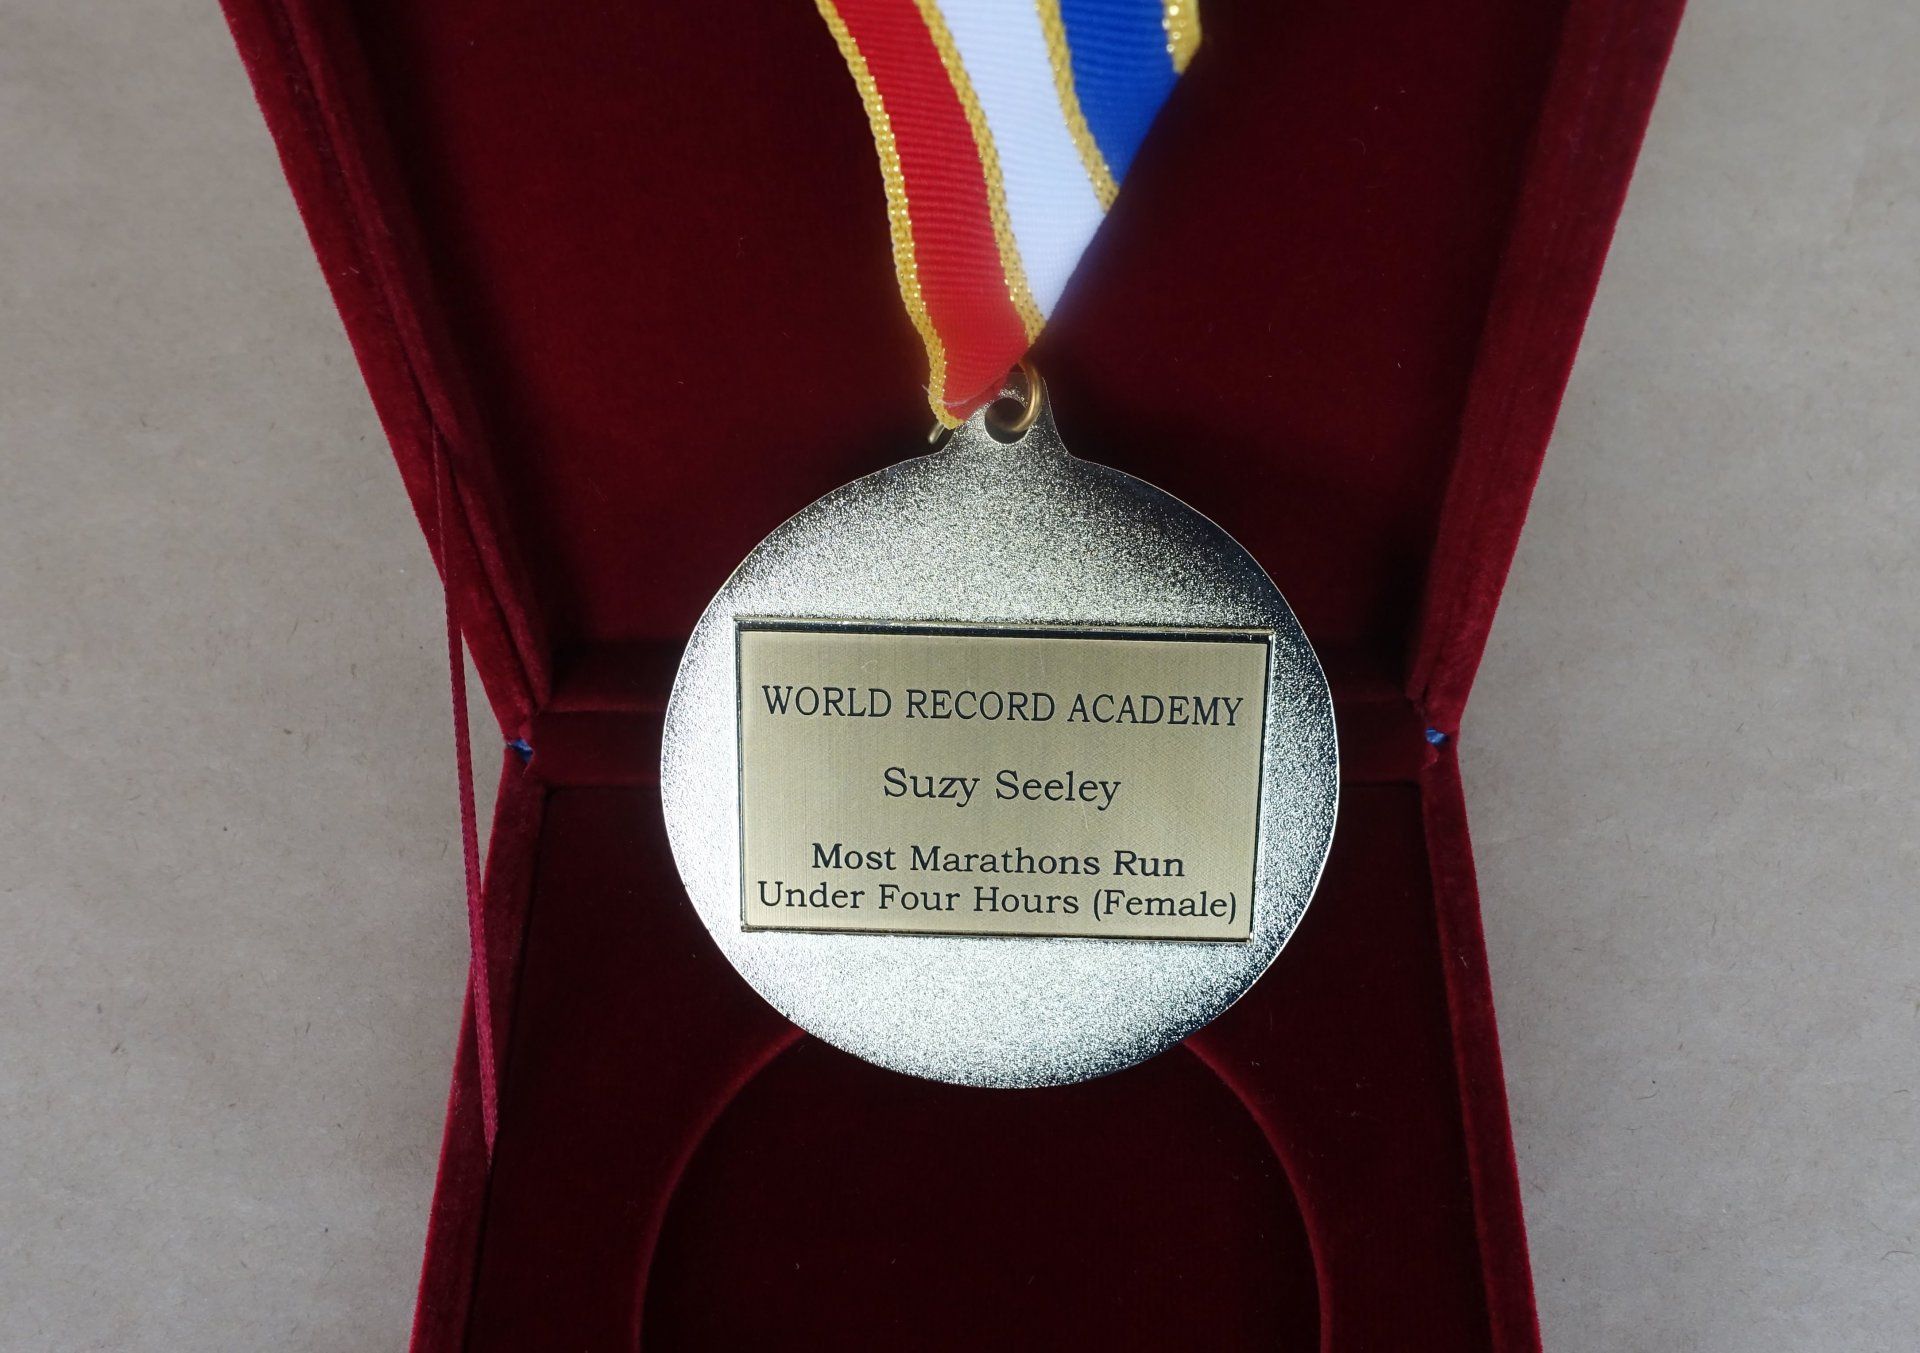   World Record Holder Medal for Mrs. Suzy Seeley, the new record holder for the Most Marathons Run Under Four Hours  (Female). Photo: AOWR